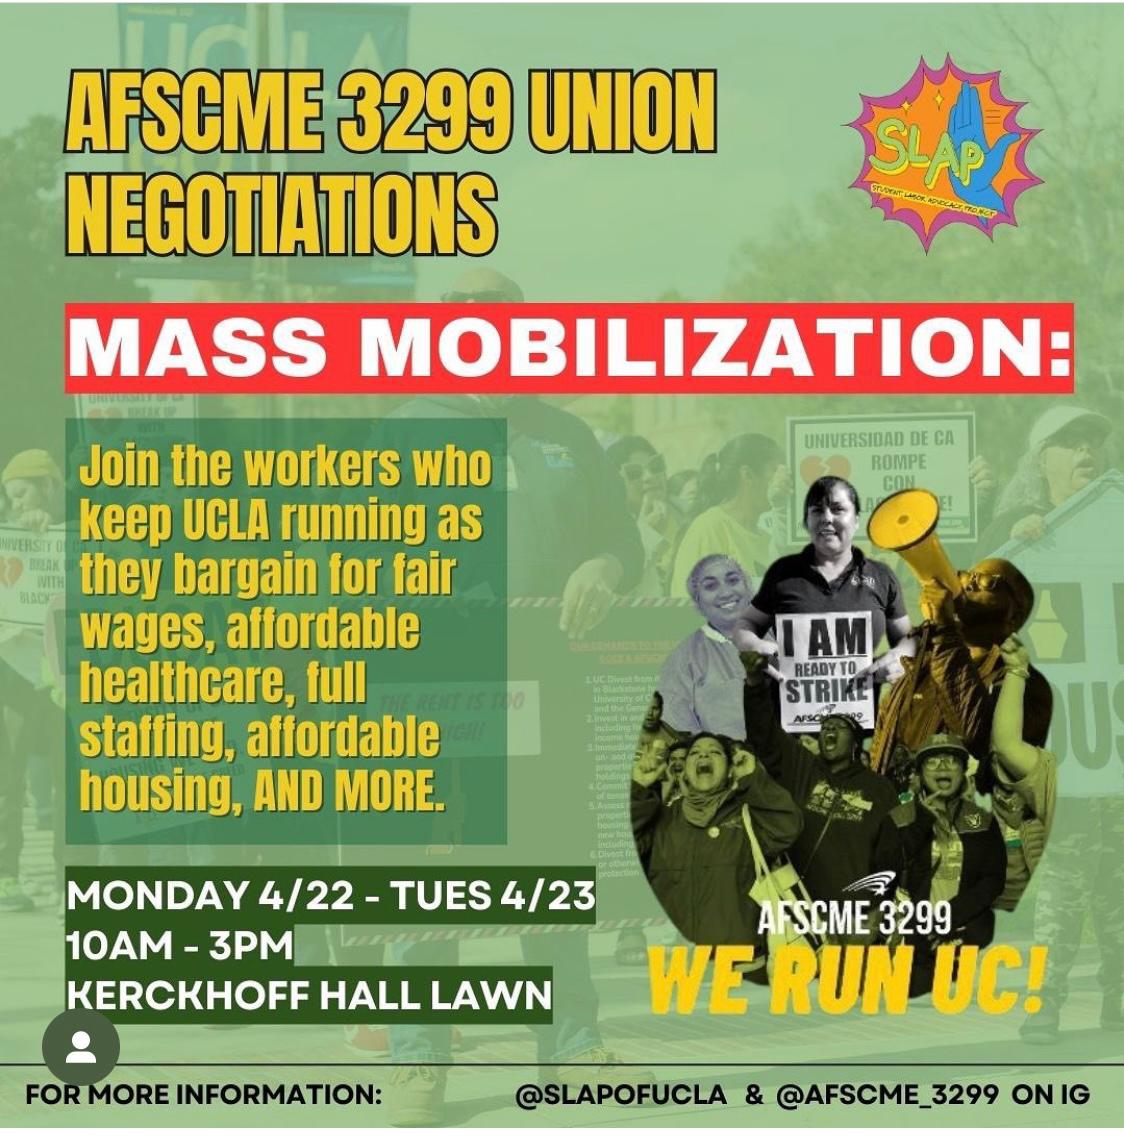 SOLIDARITY WITH AFSCME!!!!! Show out for them today with our comrades @slapofucla!!!!!